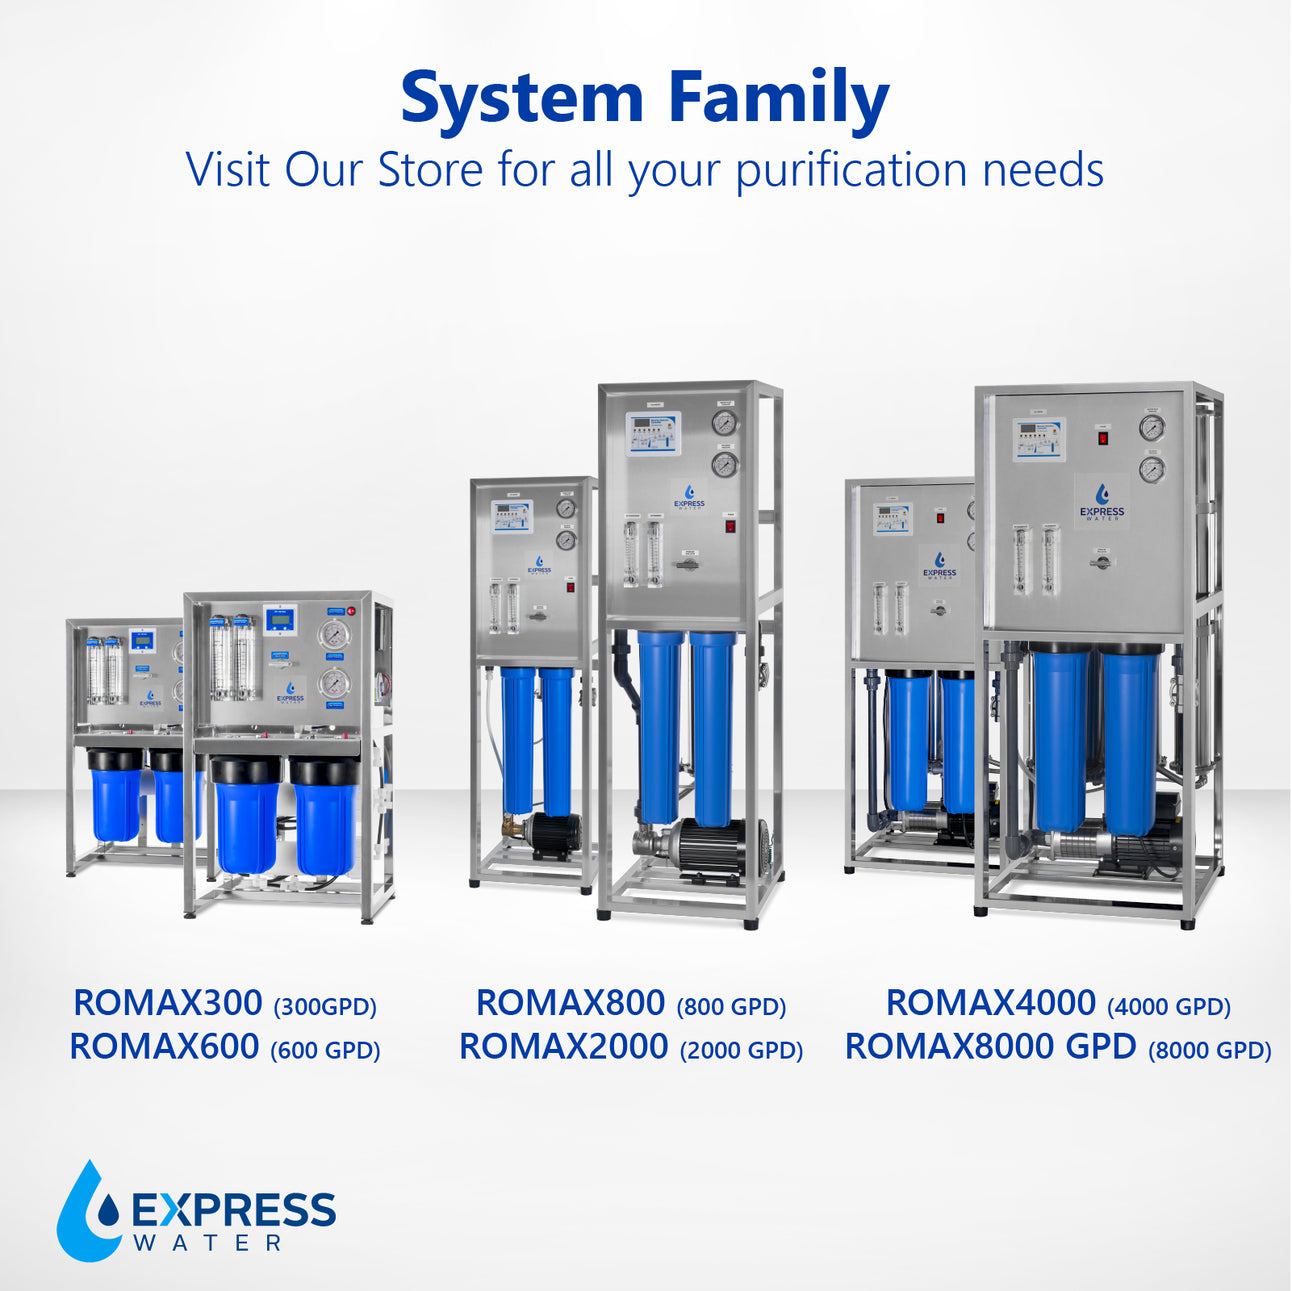 RO Water Purifier Plant, Capacity: 1000 L, Stainless Steel